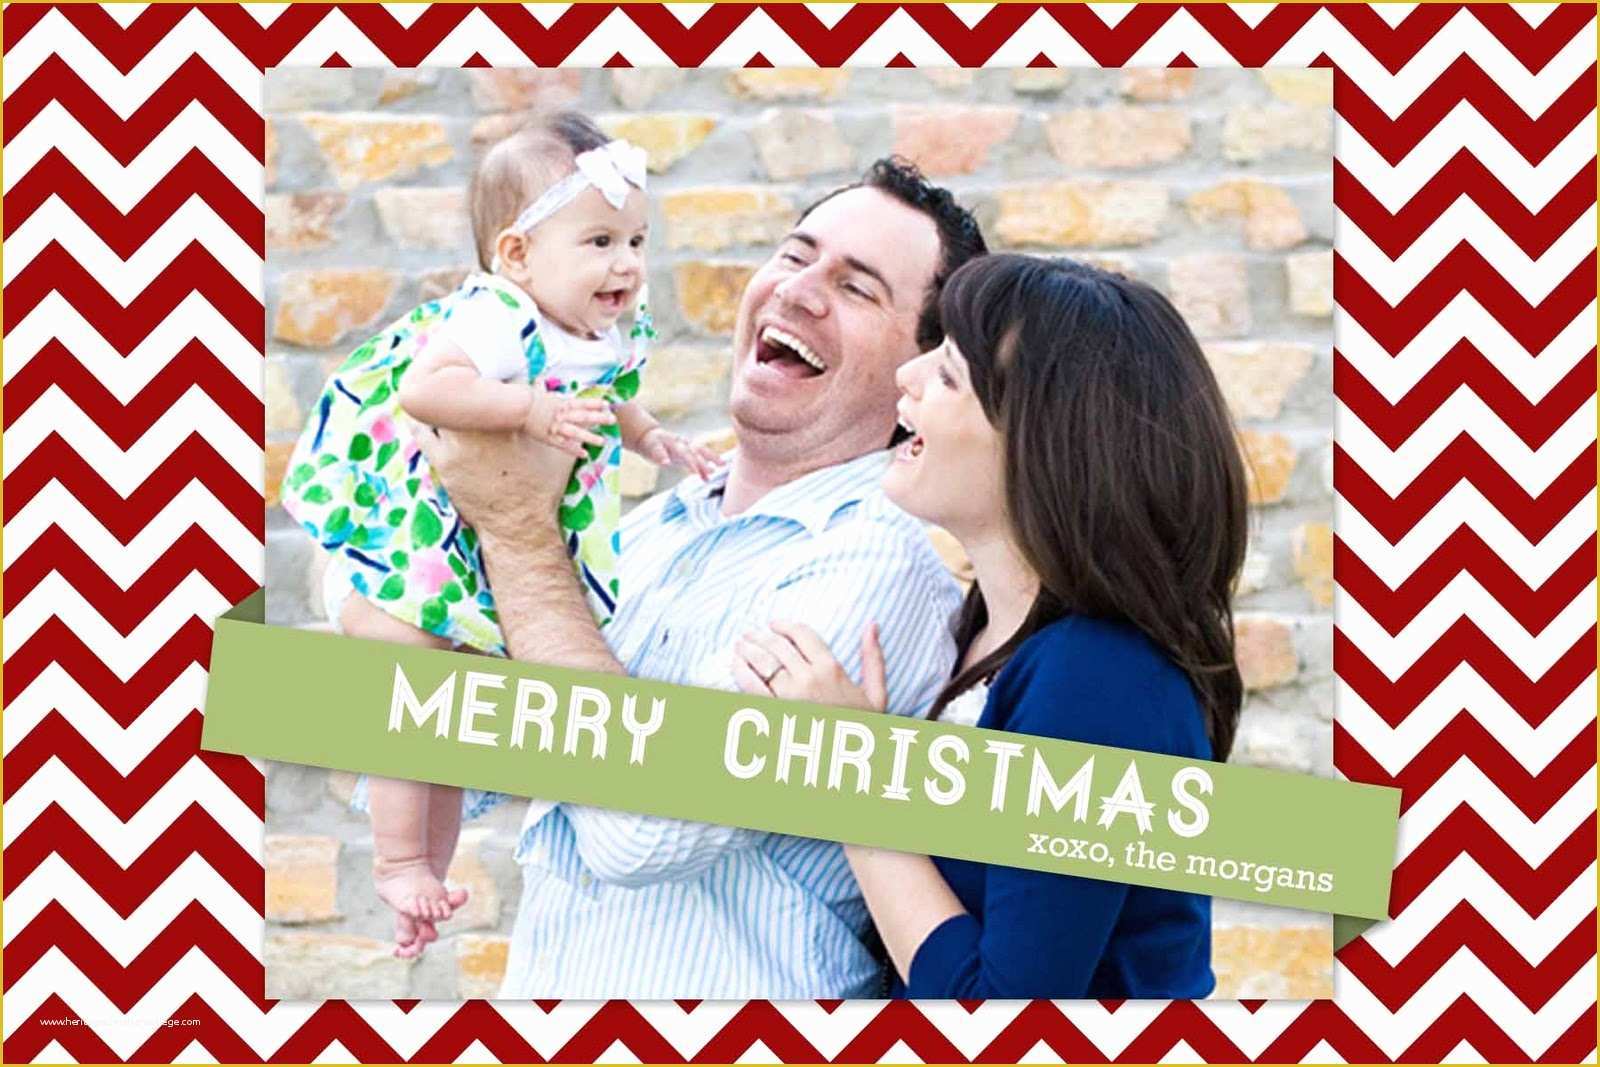 4x6 Christmas Photo Card Template Free Of Loving Life Designs Free Graphic Designs and Printables